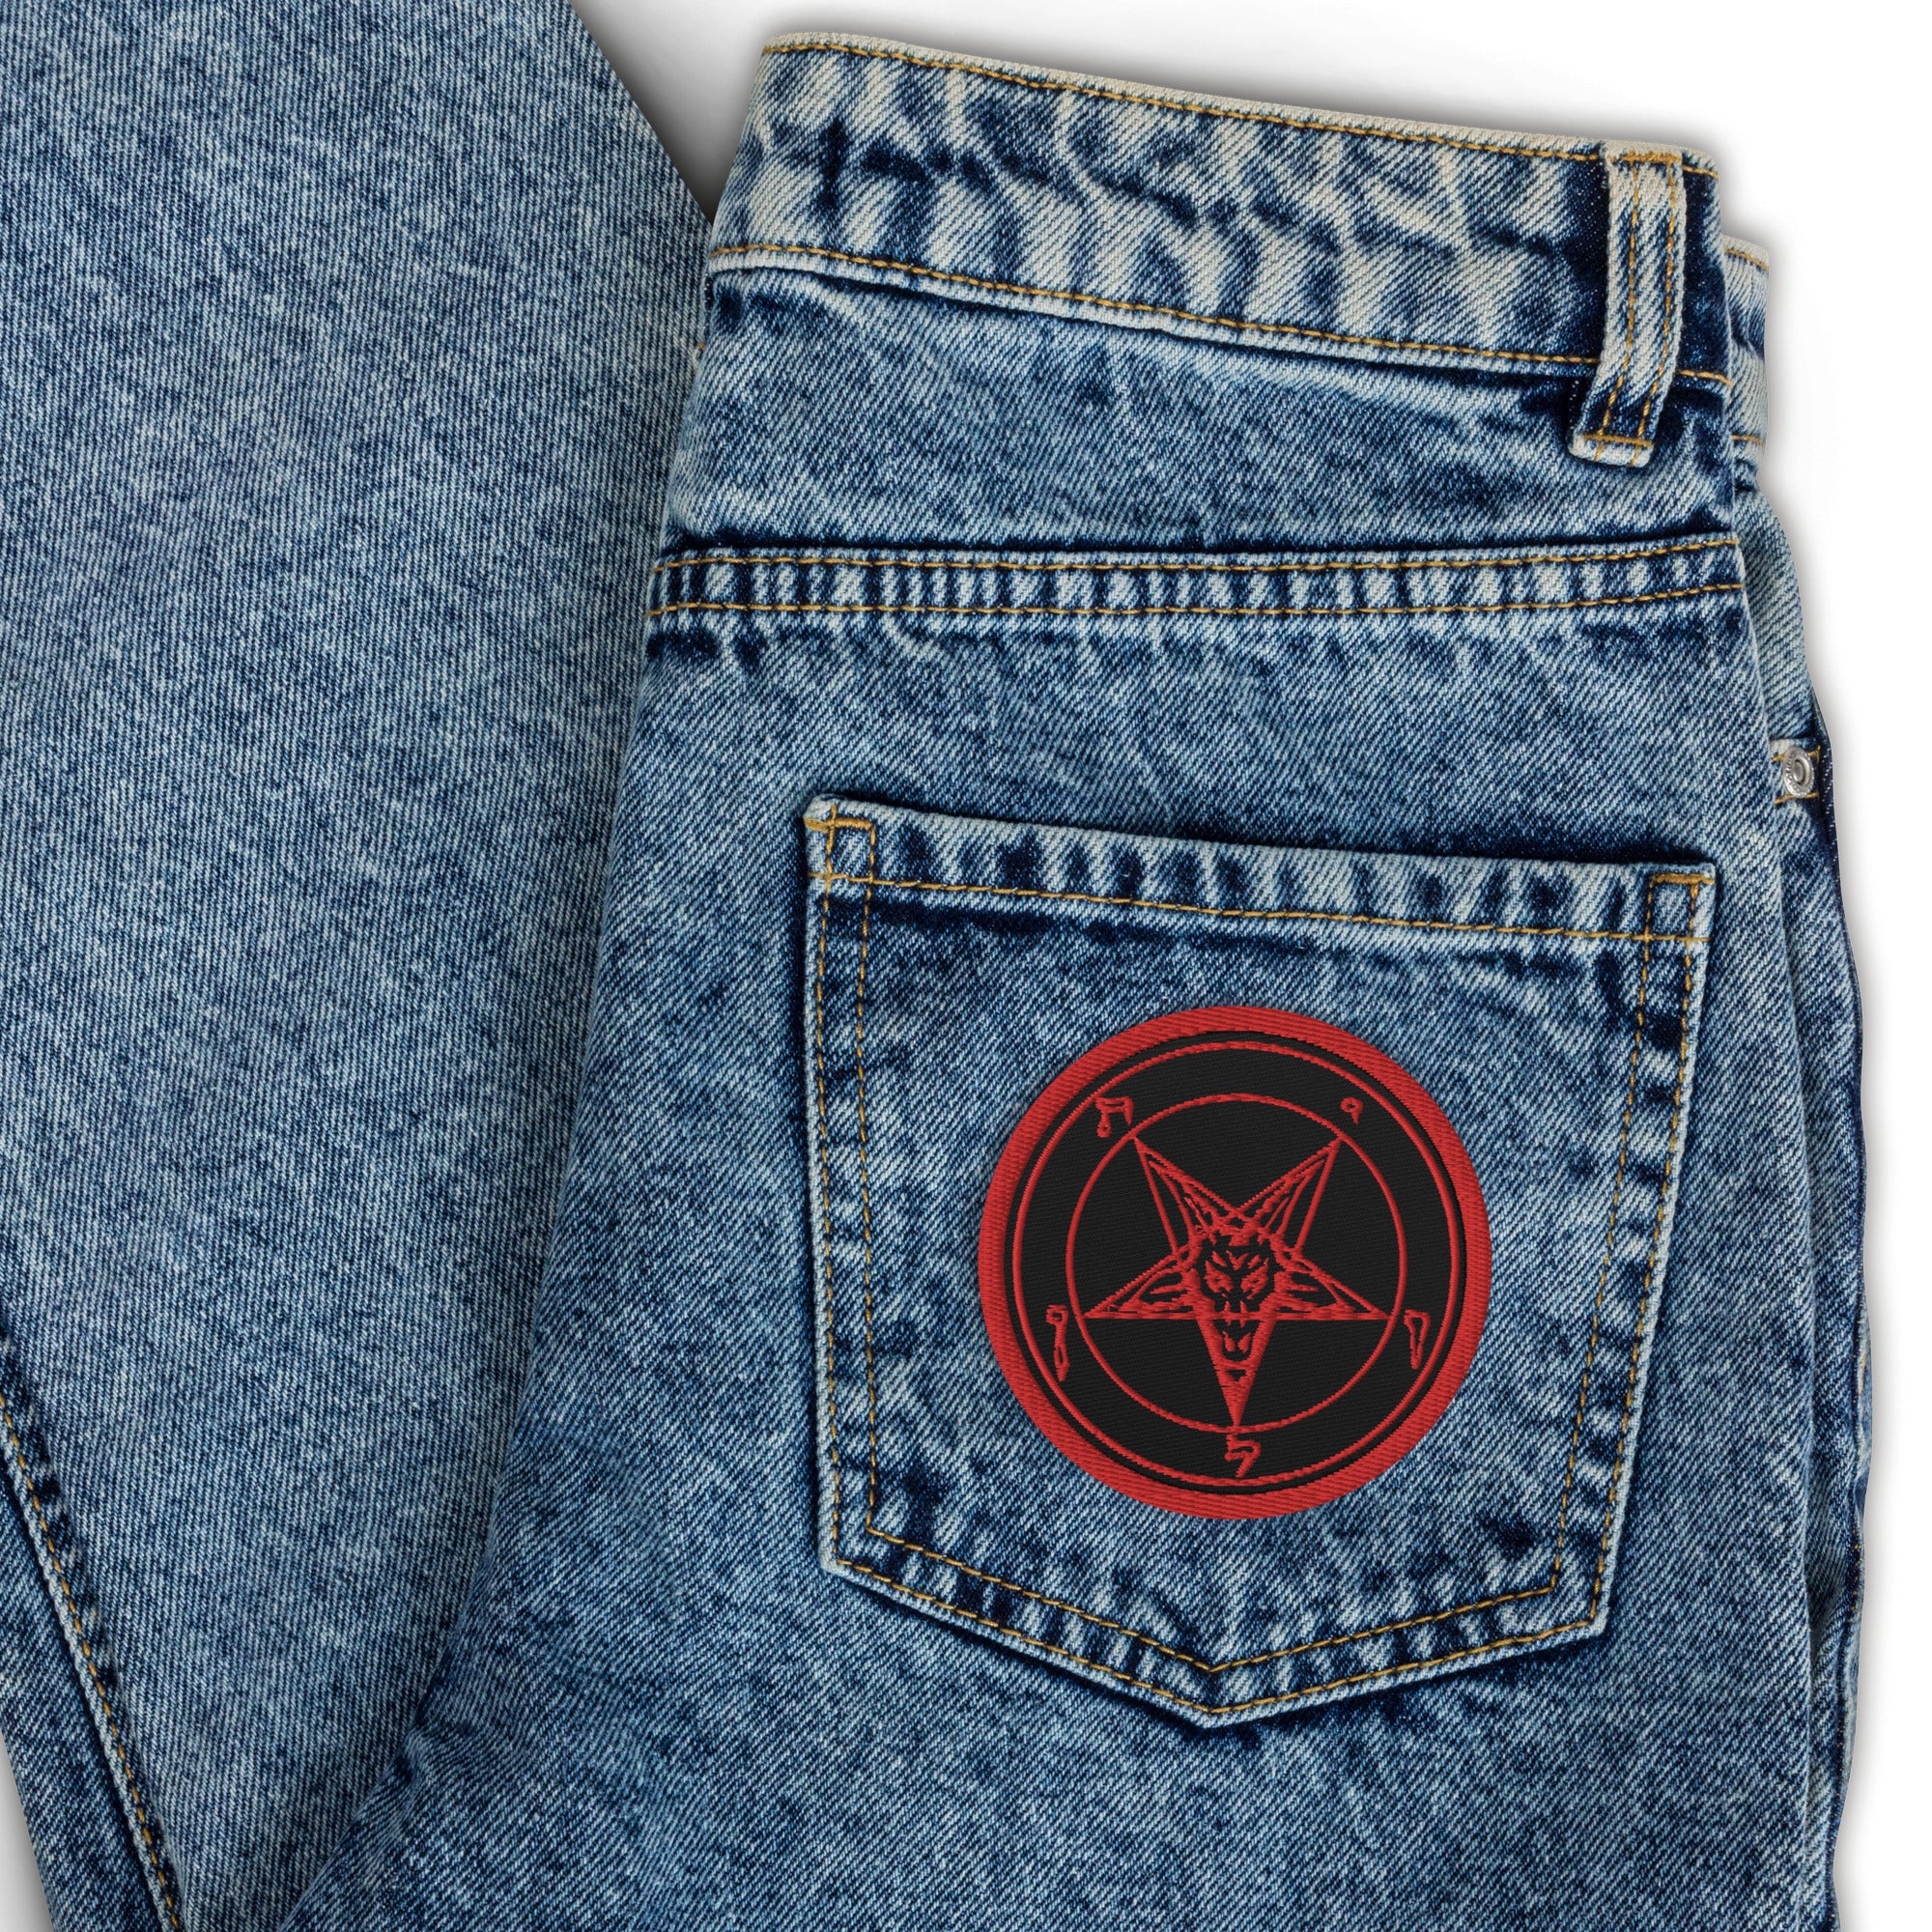 Red Sigil of Baphomet Occult Symbol Embroidered Patch - Edge of Life Designs